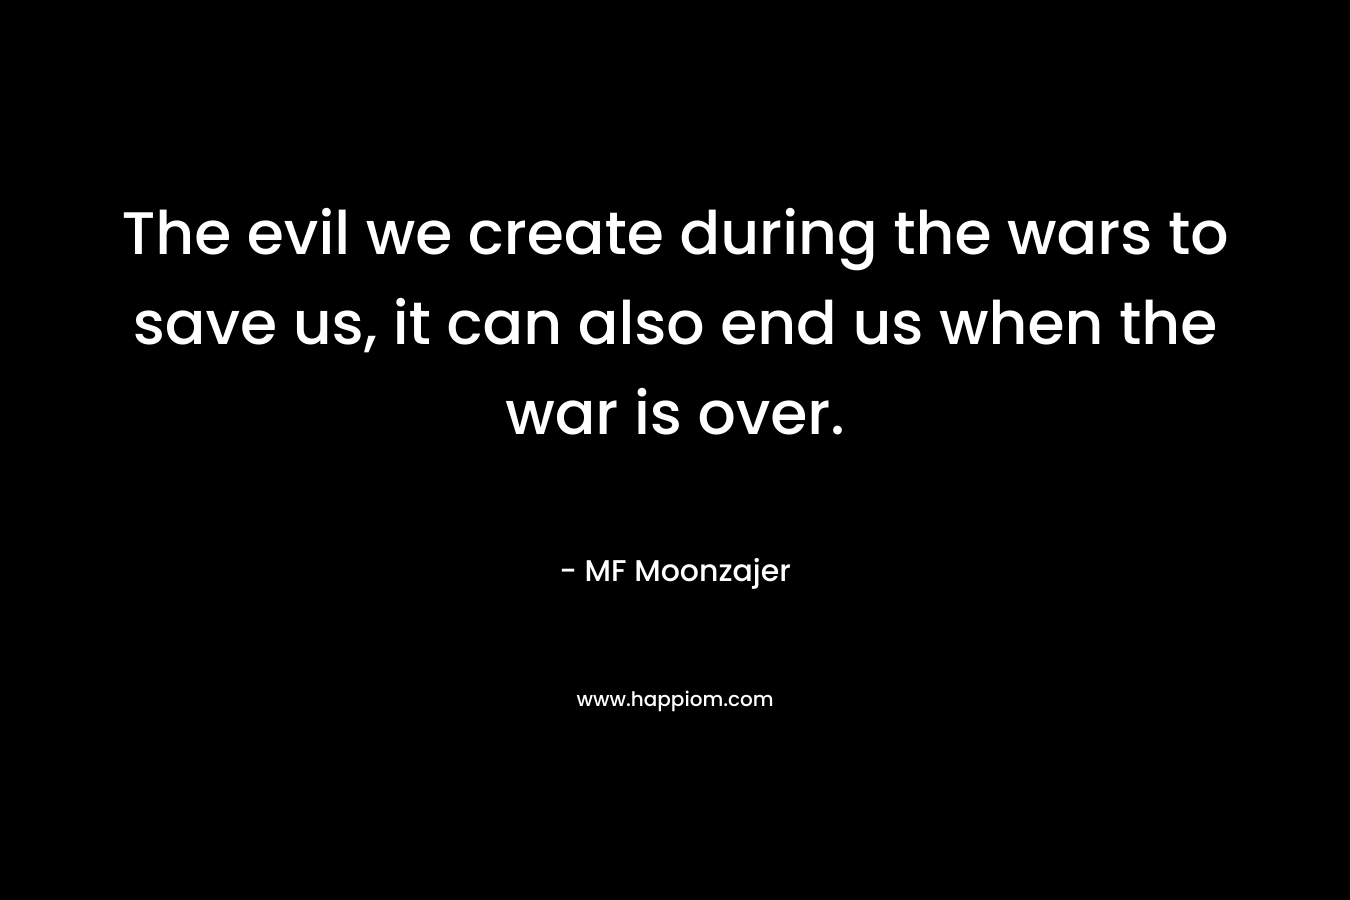 The evil we create during the wars to save us, it can also end us when the war is over.